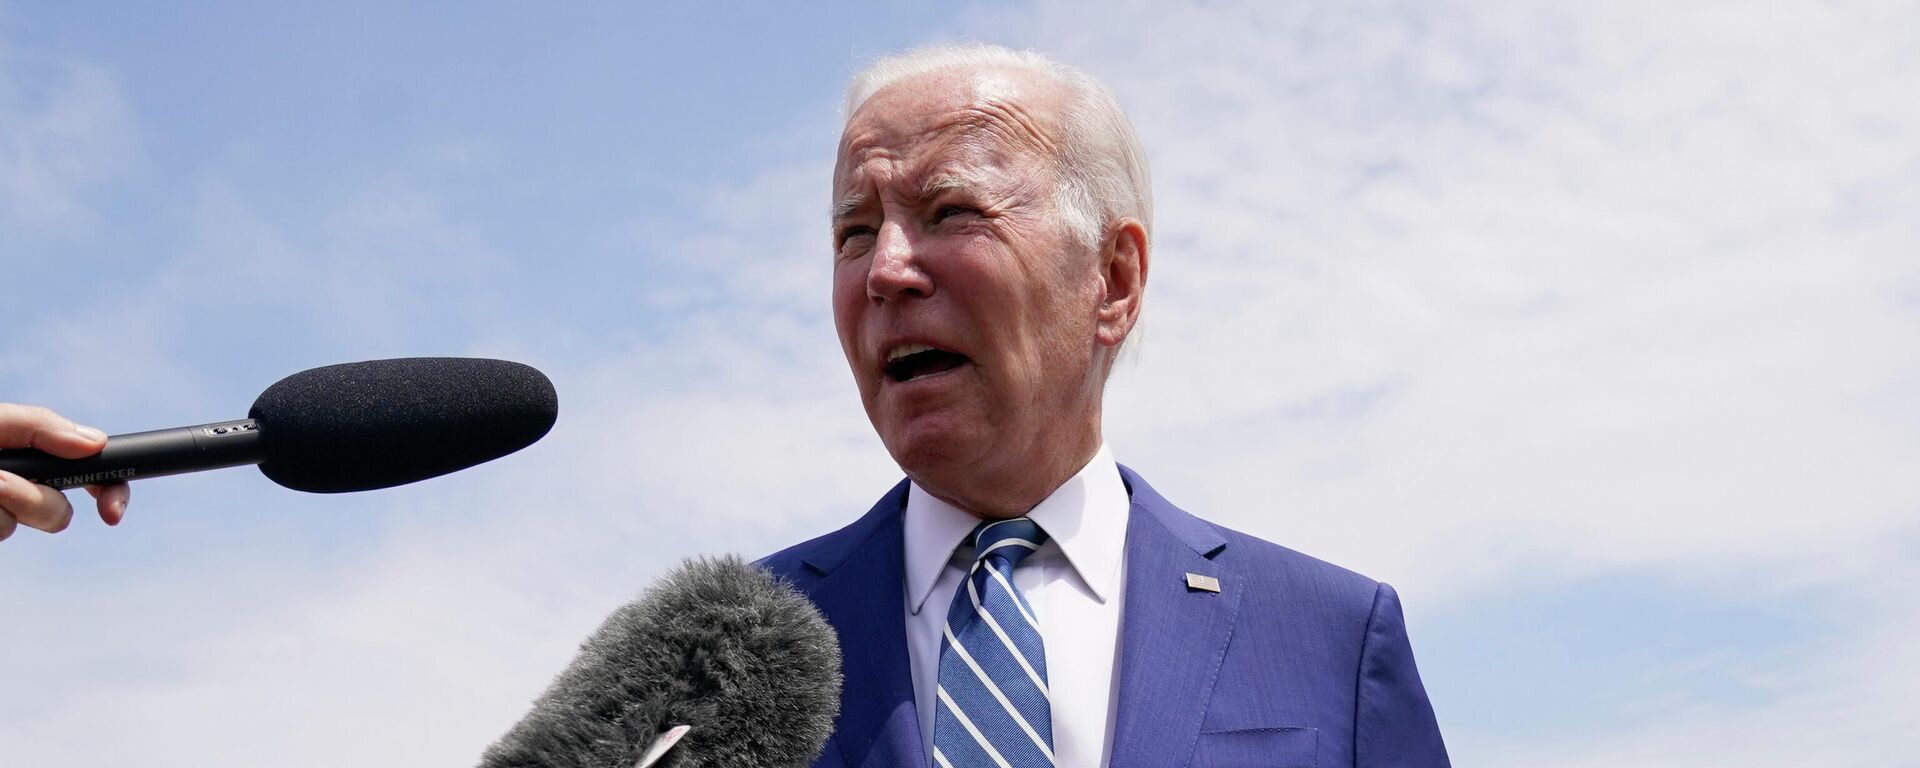 President Joe Biden speaks to reporters before he boards Air Force One for a trip to Los Angeles to attend the Summit of the Americas, Wednesday, June 8, 2022, at Andrews Air Force Base, Md. - Sputnik International, 1920, 15.06.2022